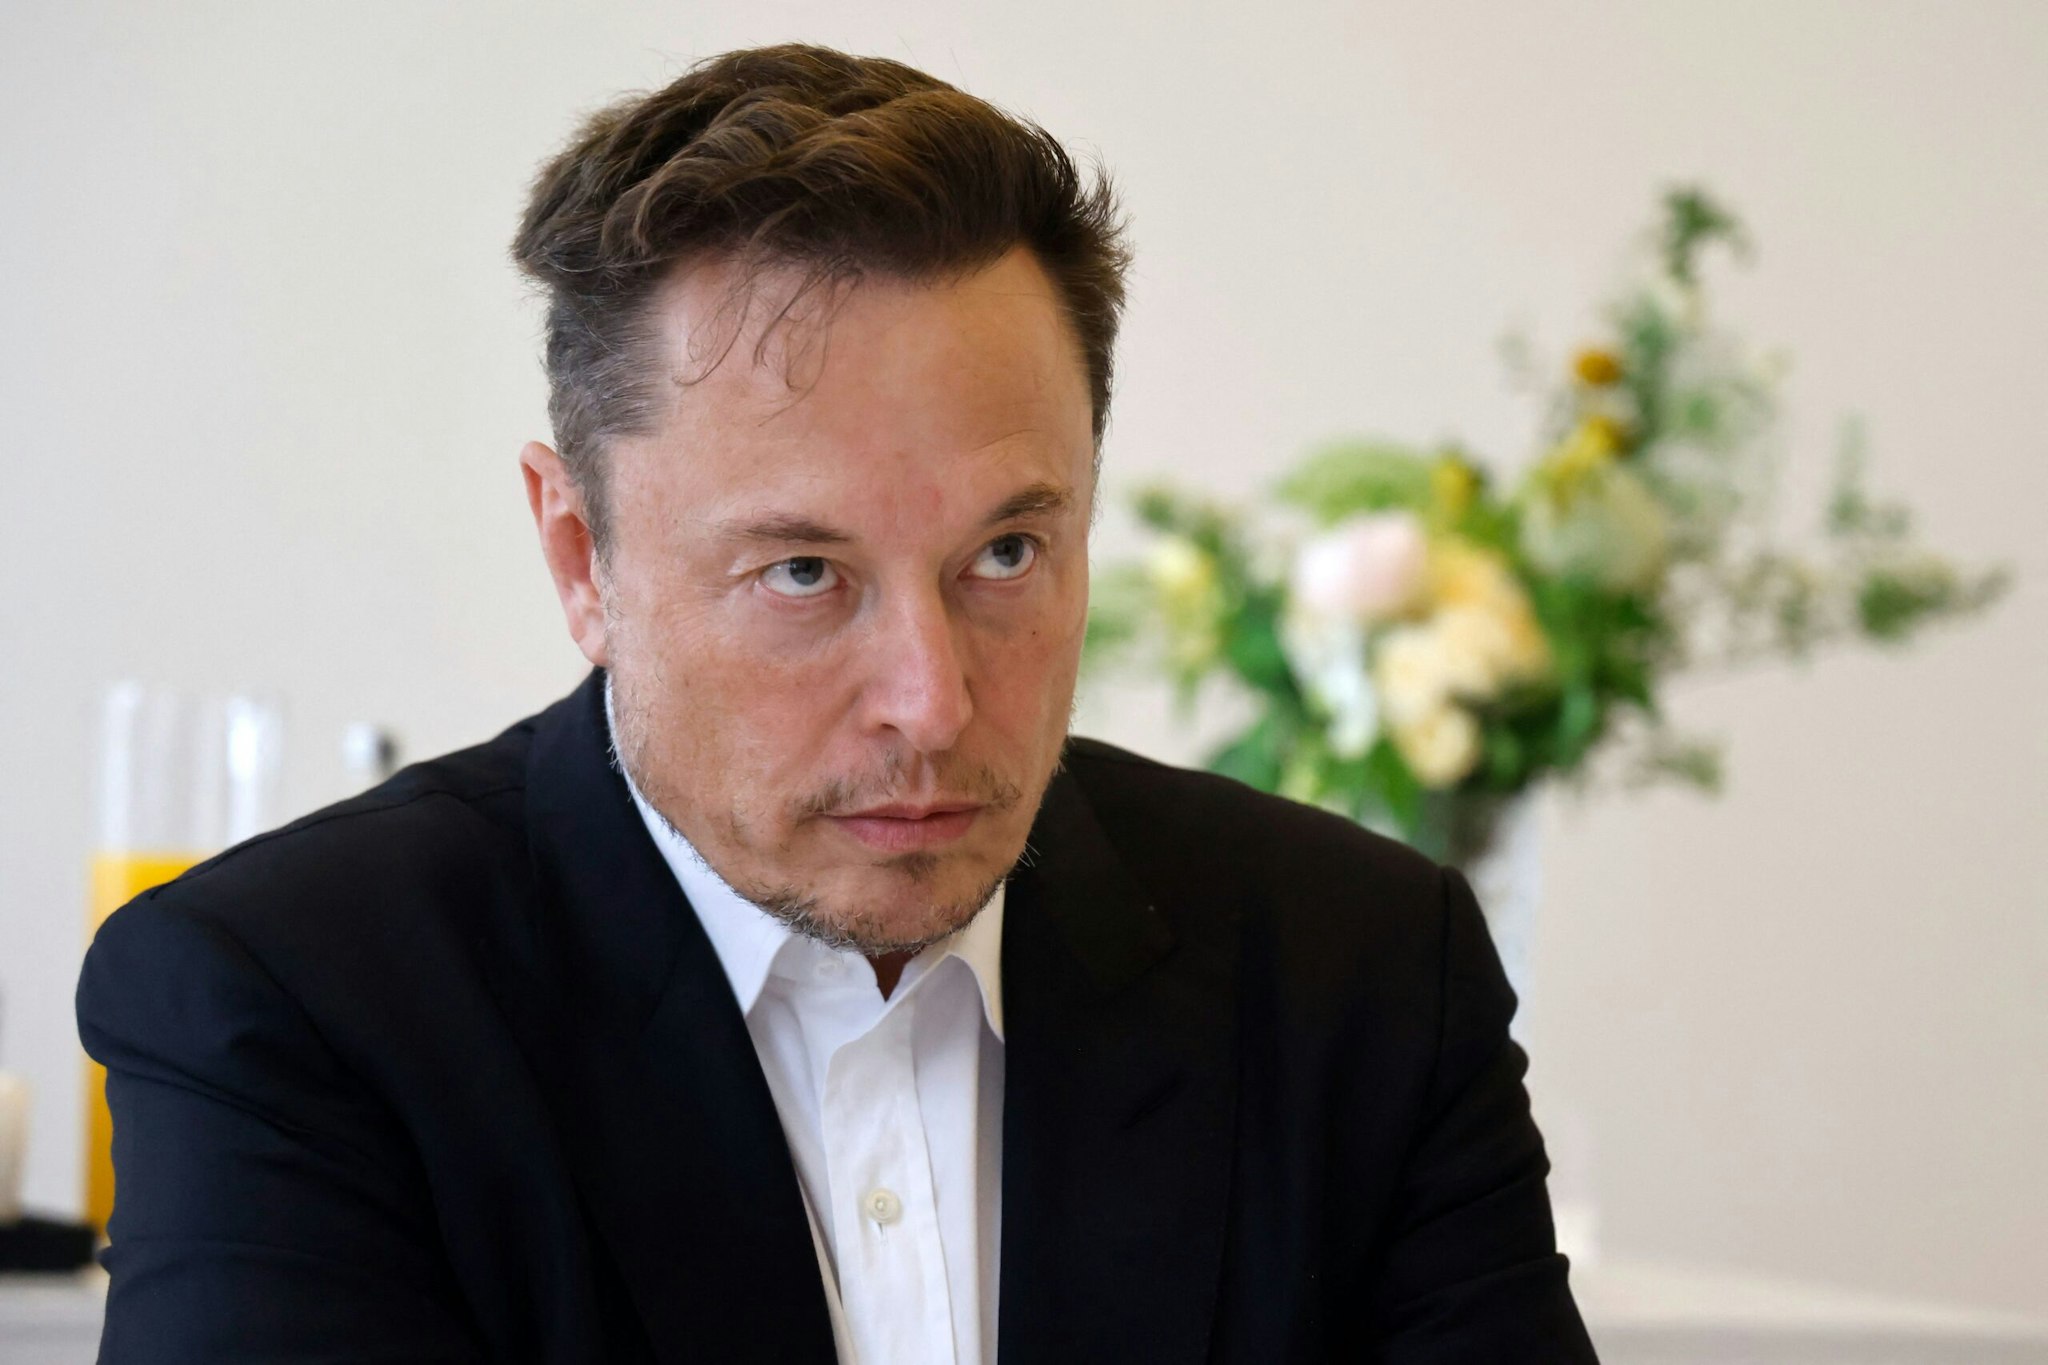 Elon Musk retweeted The Daily Wire's "What Is A Woman?" after a night of confusion at Twitter.